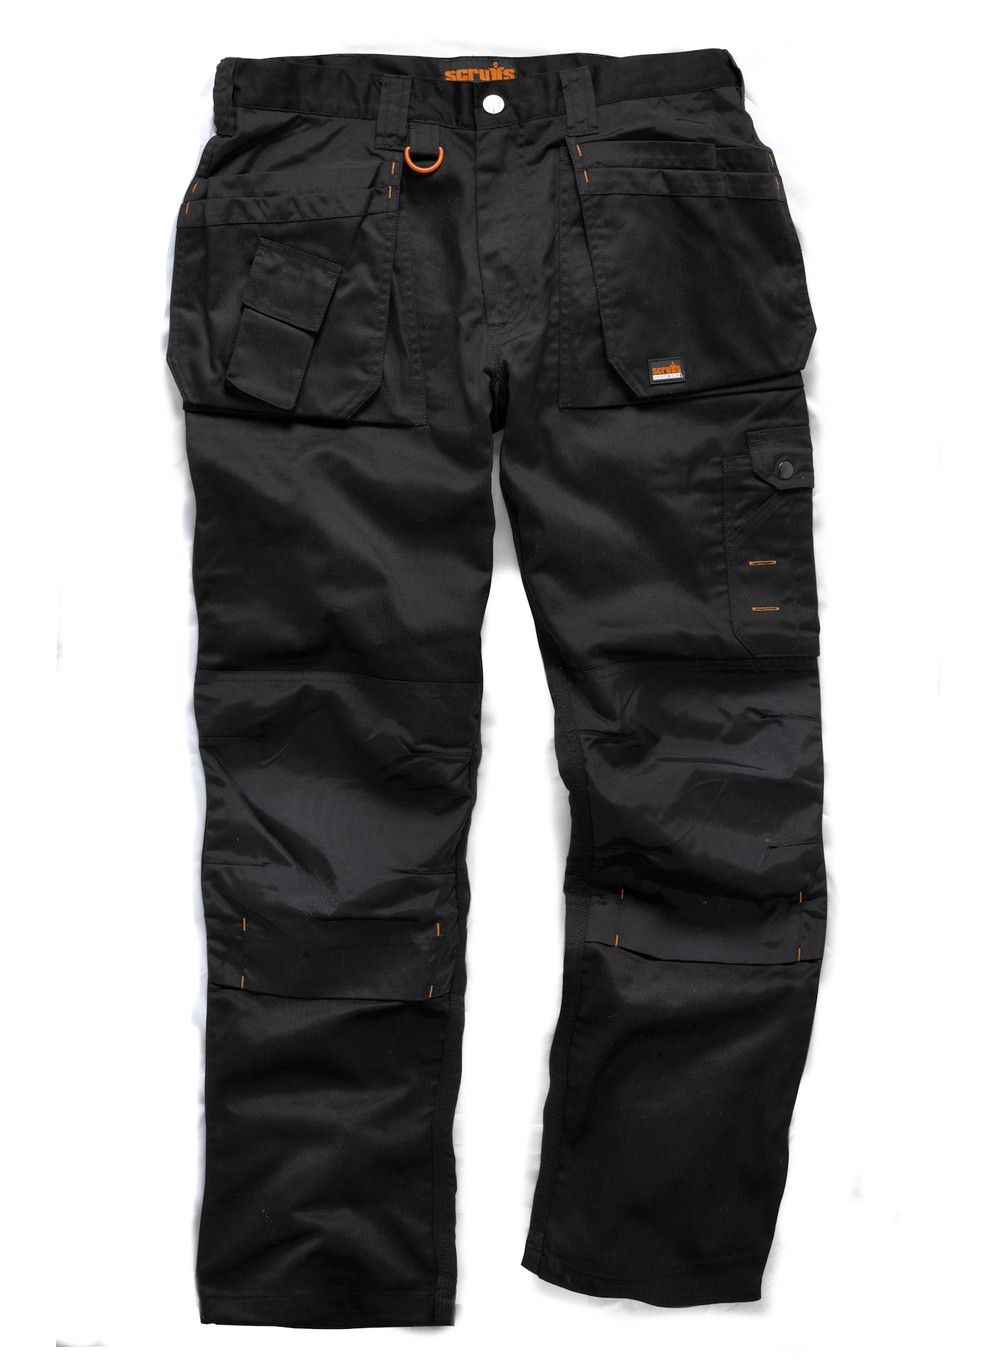 ORN Clothing 2100N Harrier Stretch Work Trouser | Black | Size 28